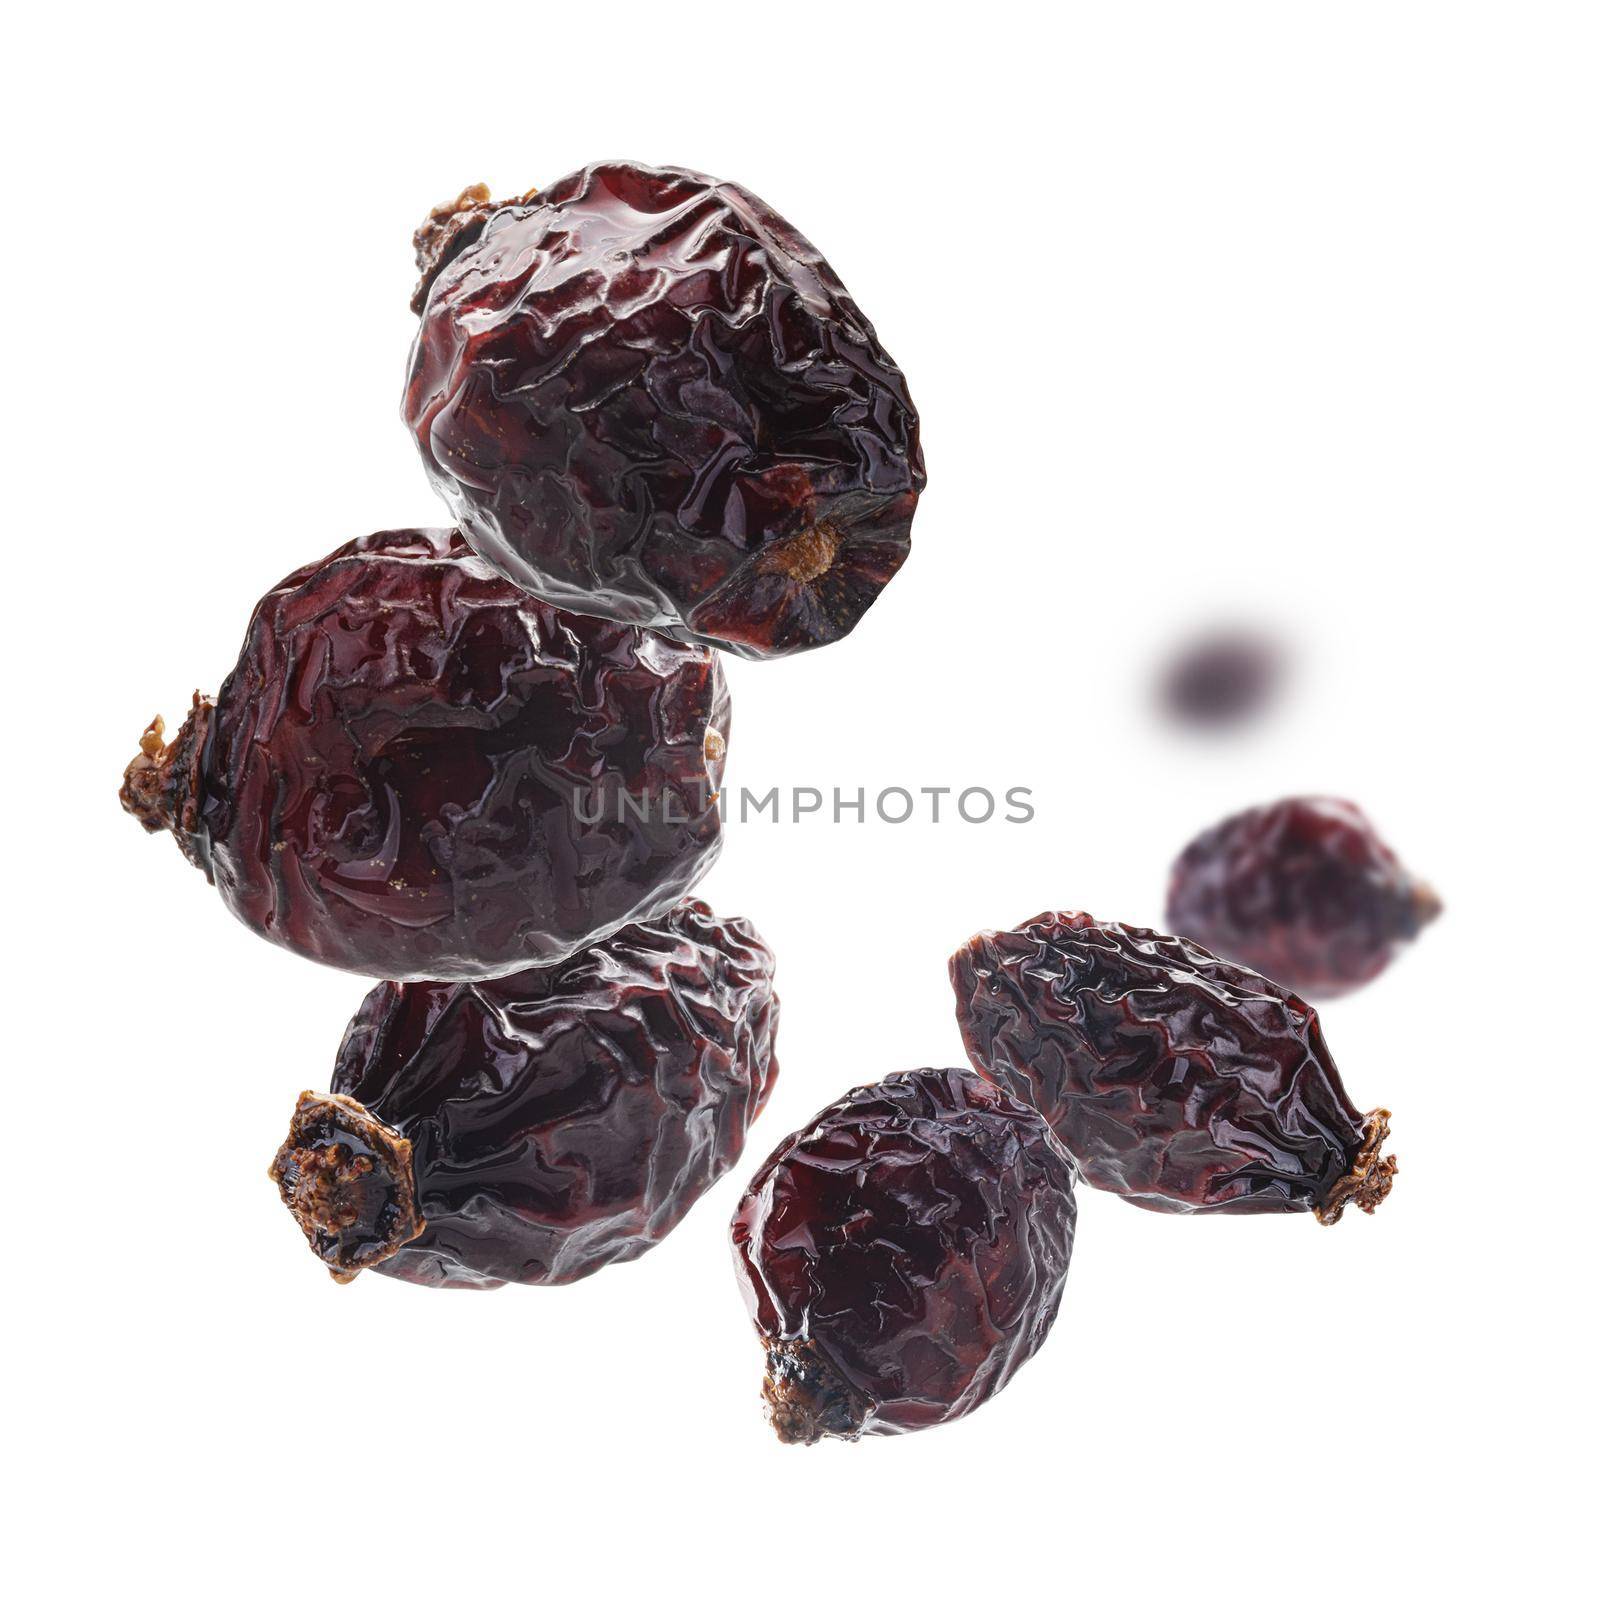 Dried rosehip berries levitate on a white background by butenkow